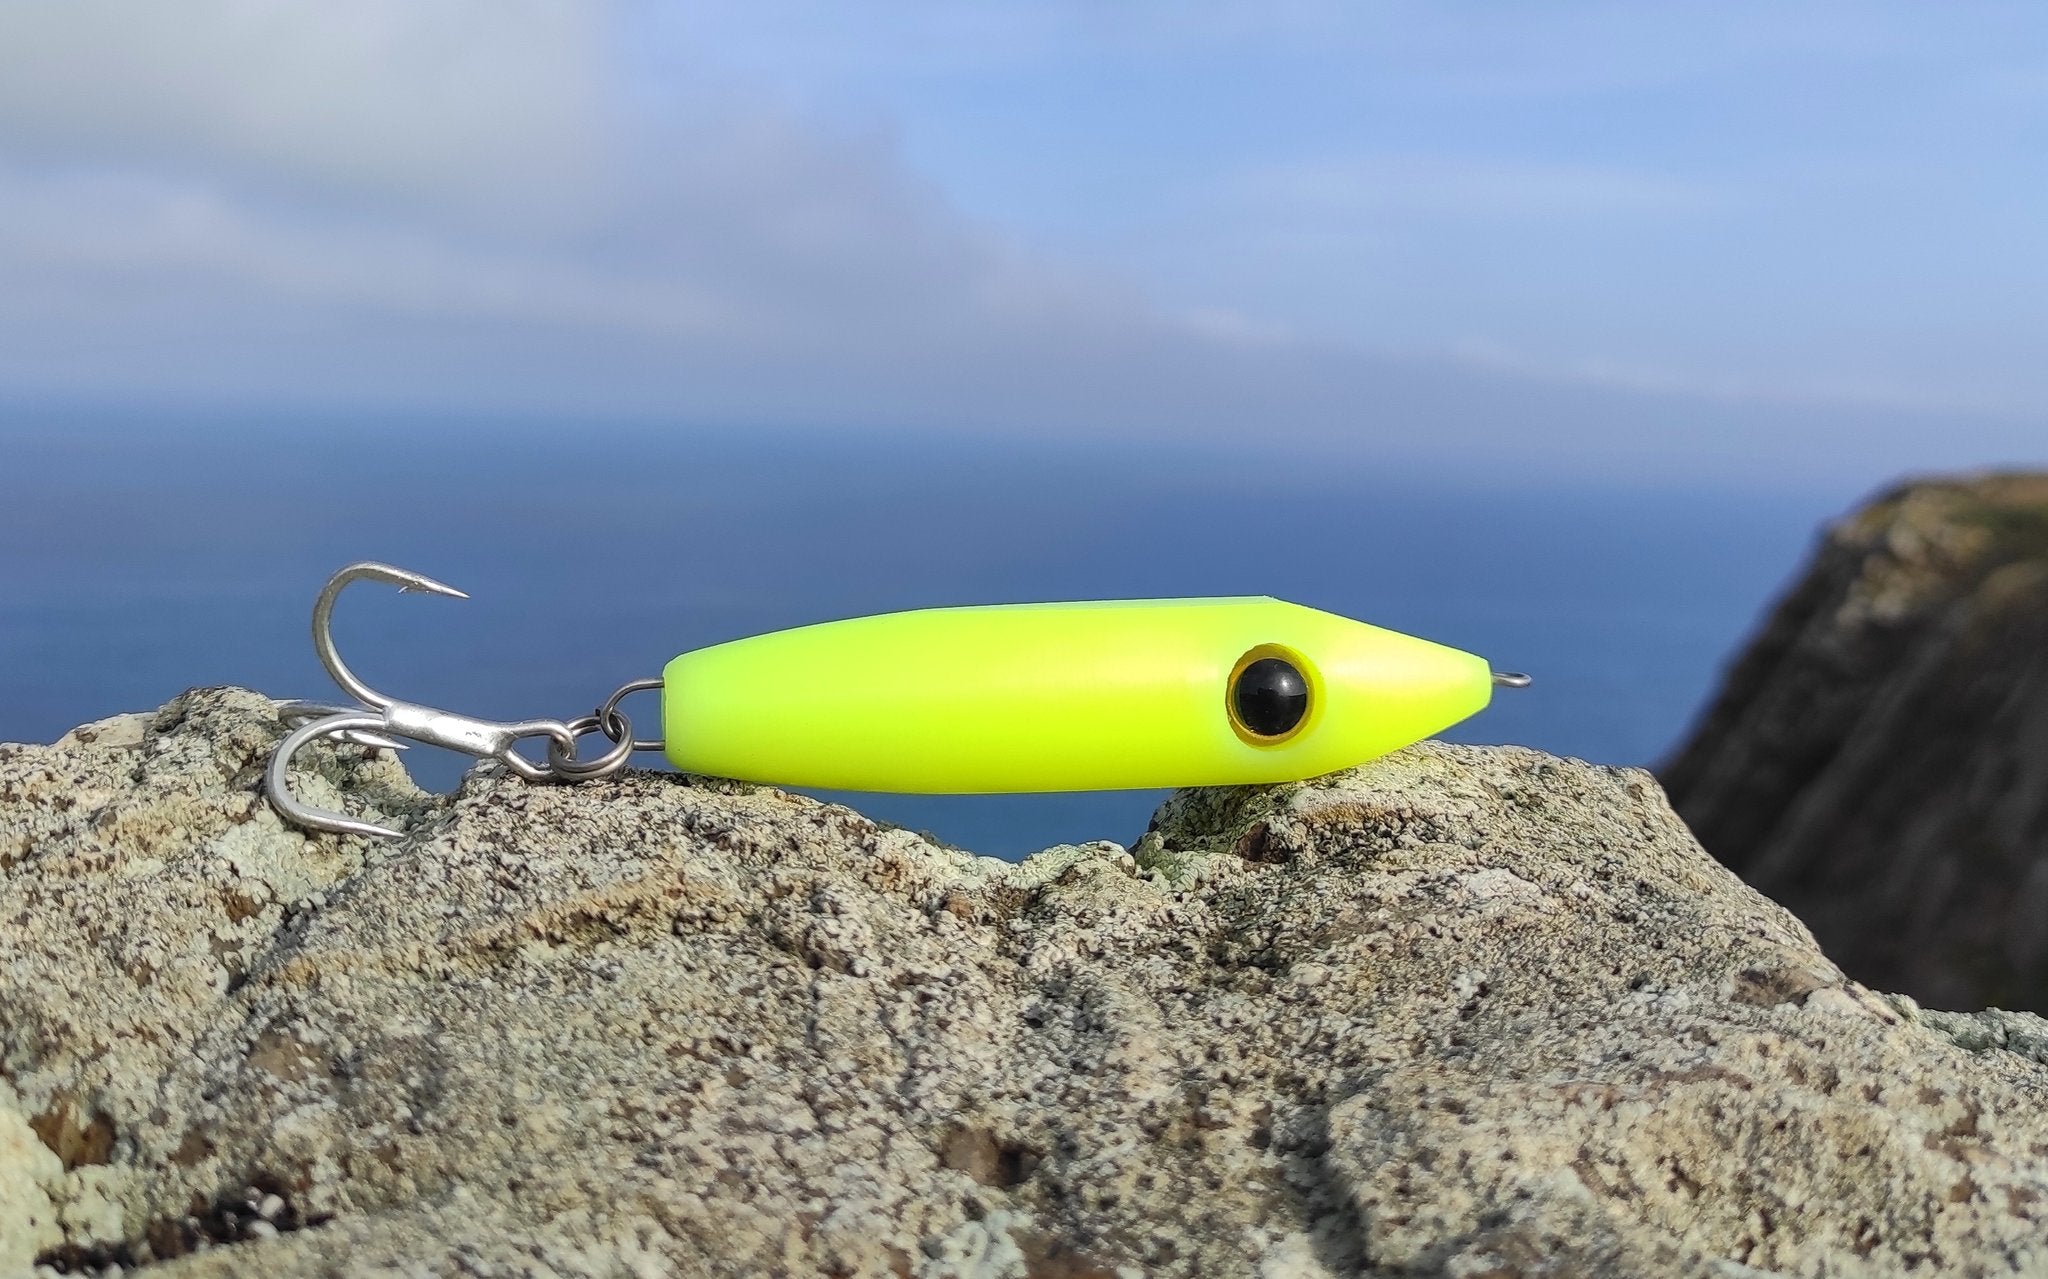 Samson Enticer Minnow Topwater Sub Fishing Lure High Visibility Yellow 30g